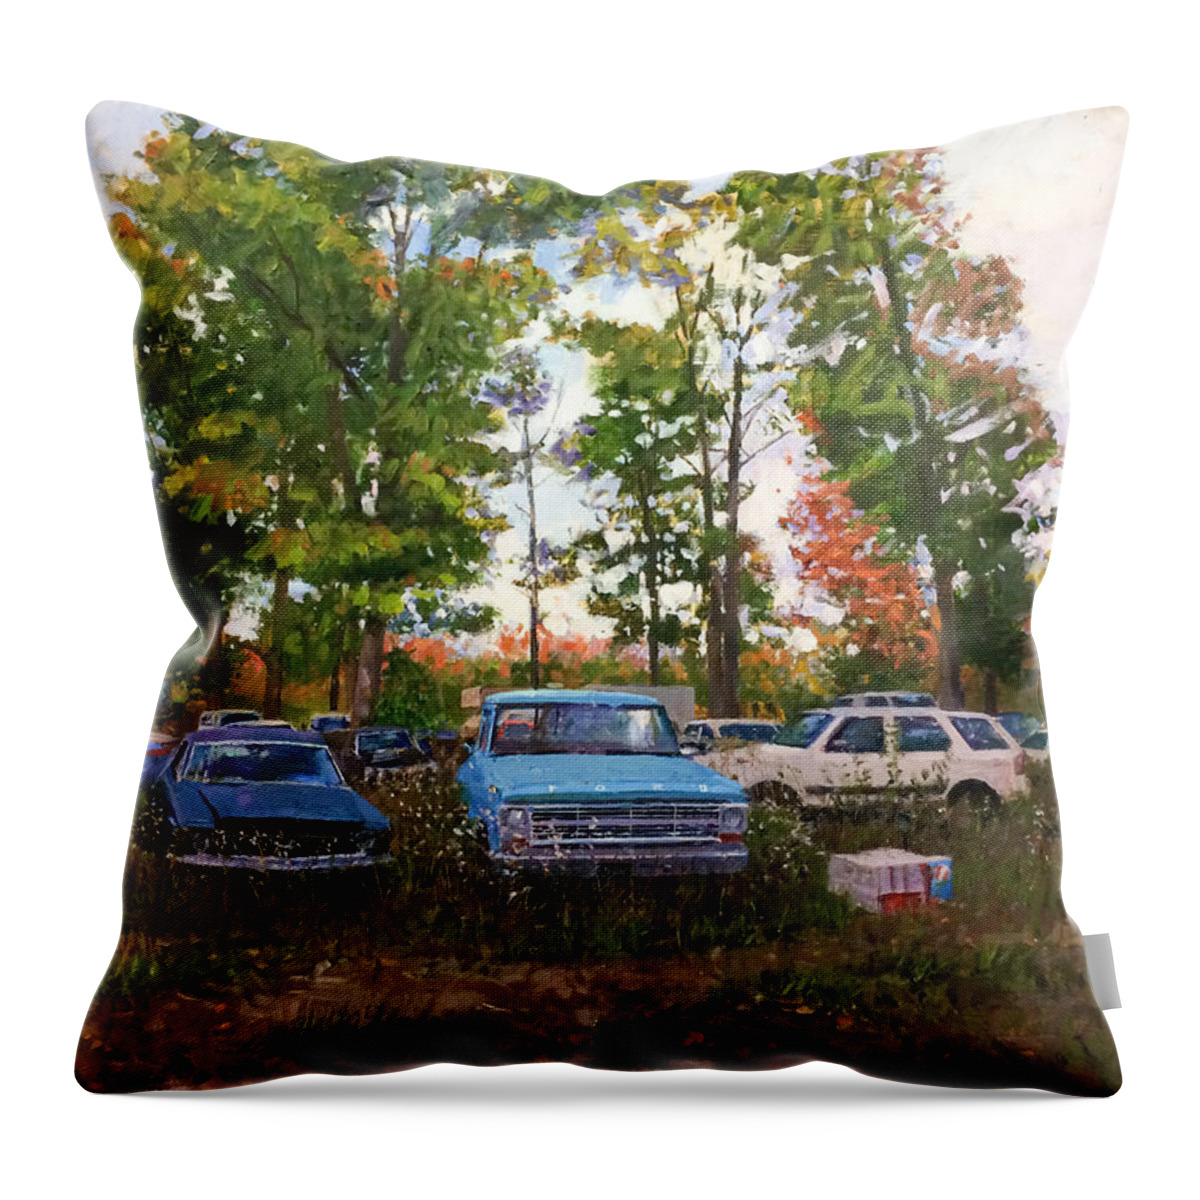 Old Cars Throw Pillow featuring the painting Junk Yard by Edward Thomas